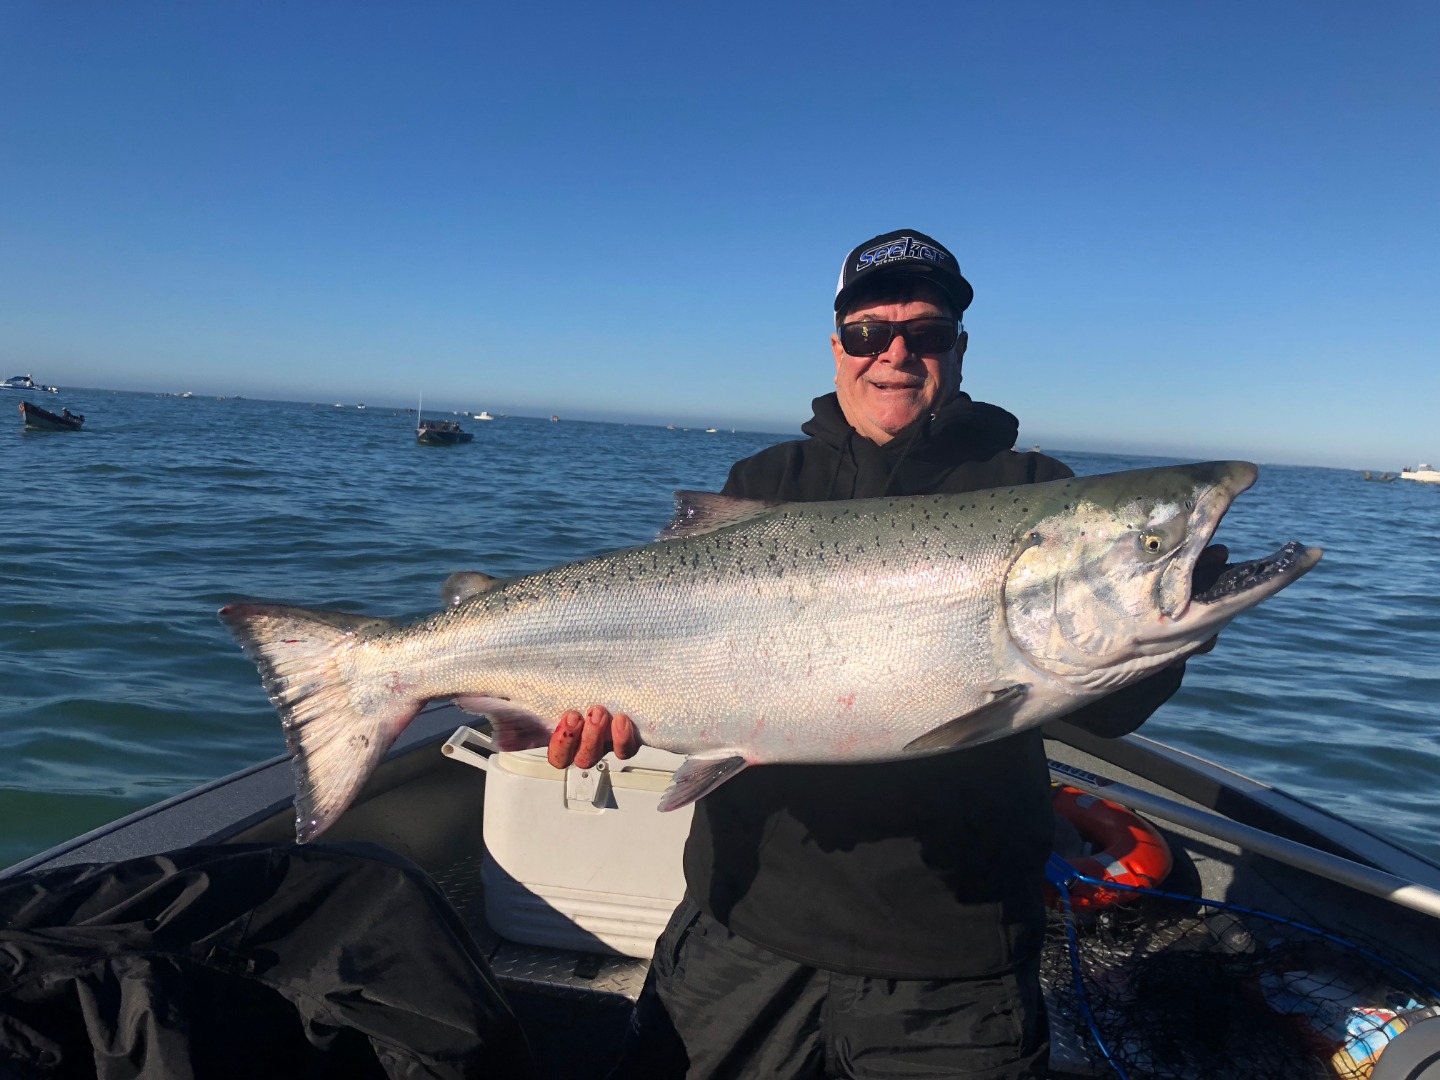  Chetco Bubble fishery kicking out some big kings